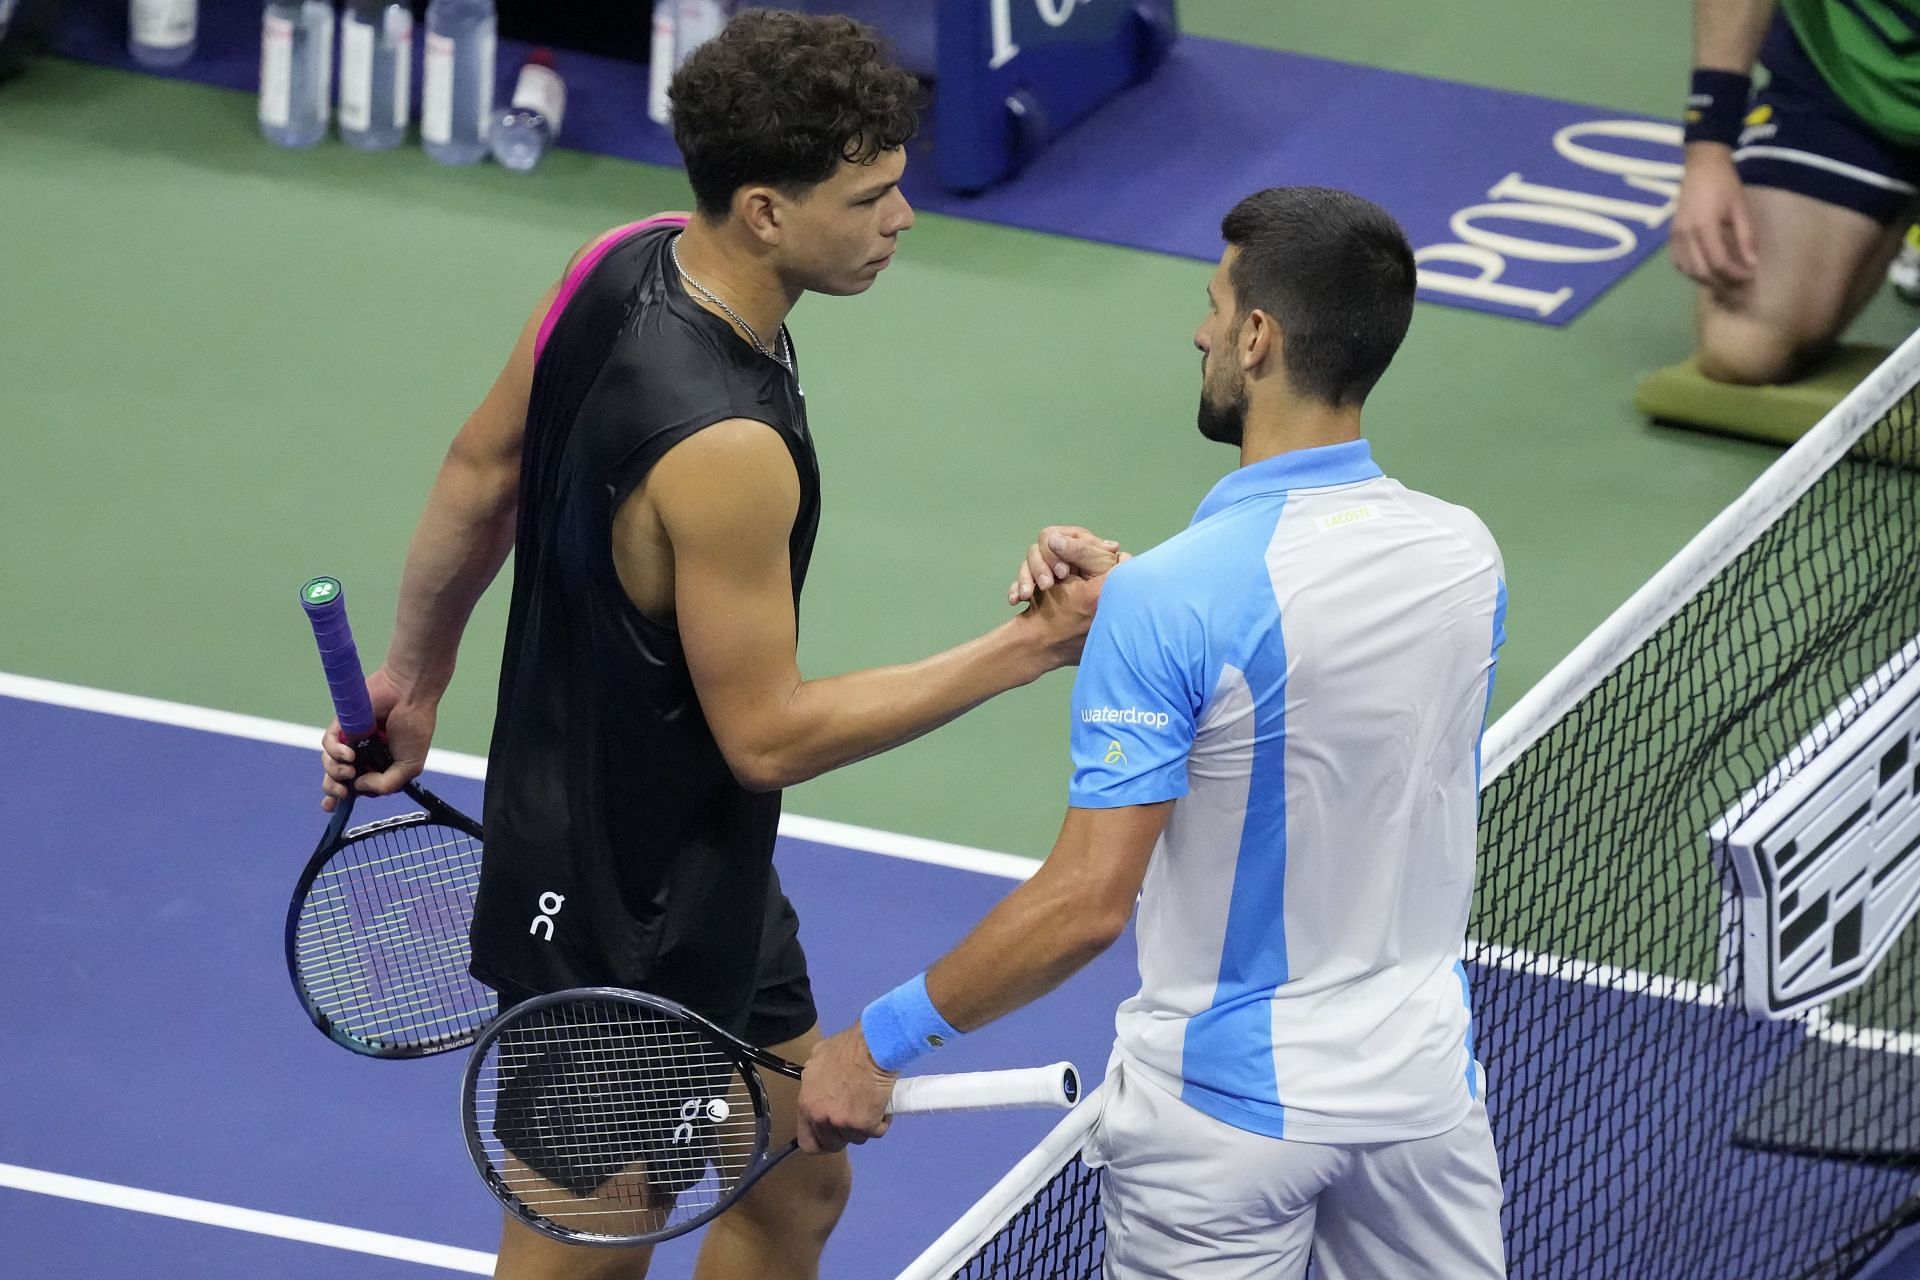 Djokovic and Shelton meet at the net after the US Open semifinal